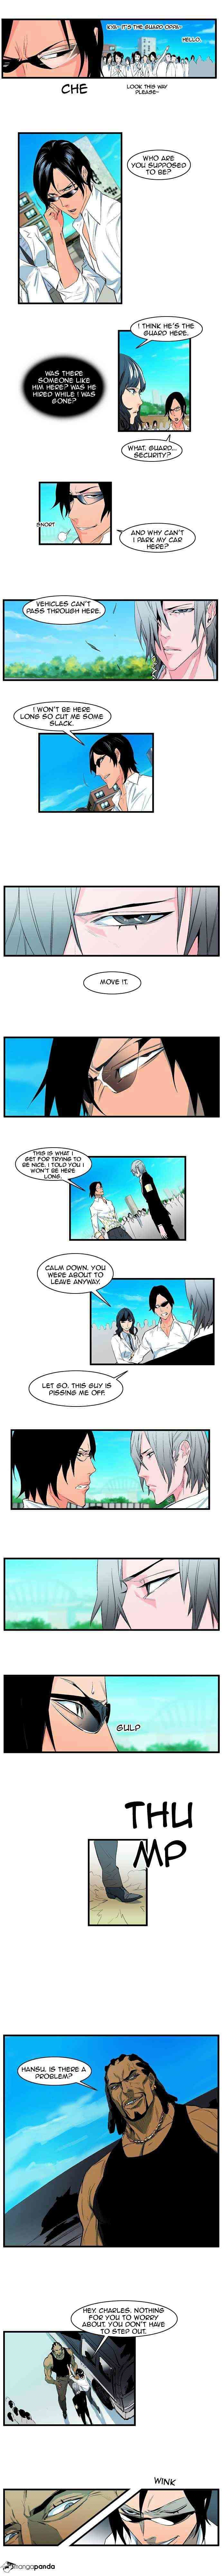 Noblesse Chapter 94 page 4